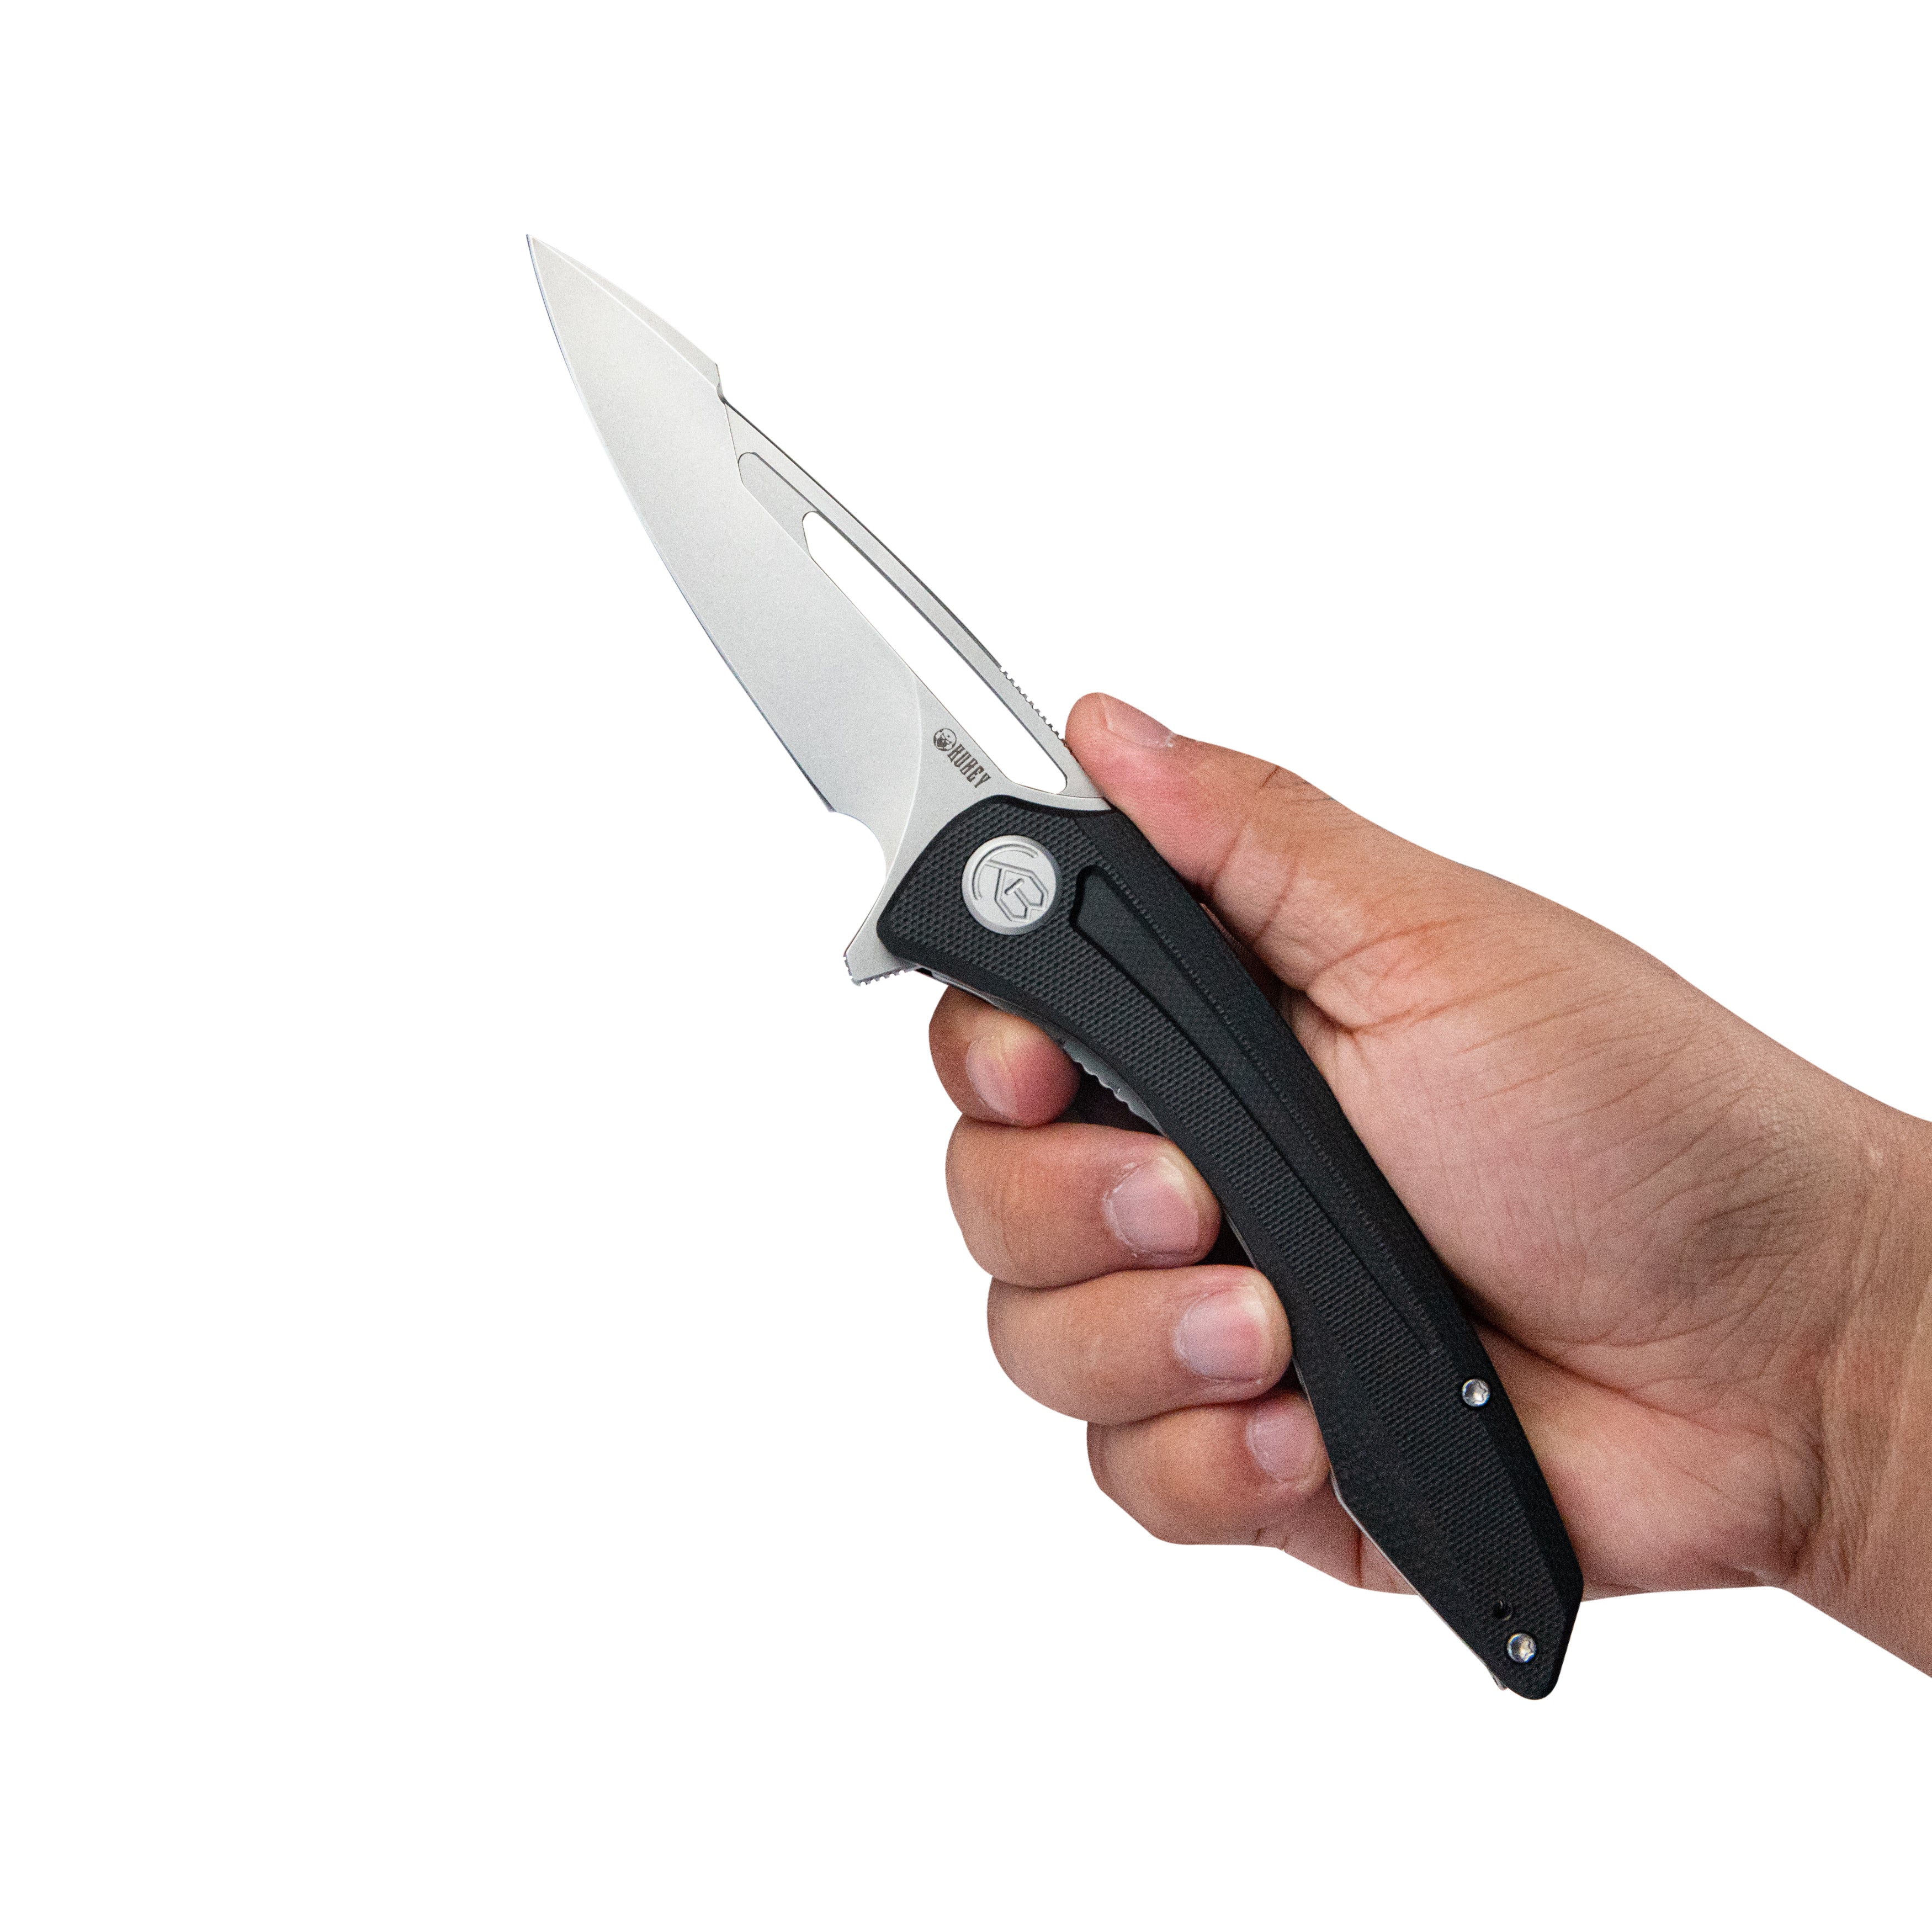 Merced Folding Knife 3.46" Beadblasted AUS-10 Blade With Durable Black G10 Handle Reliable Tactical Pocket Knife KU345A